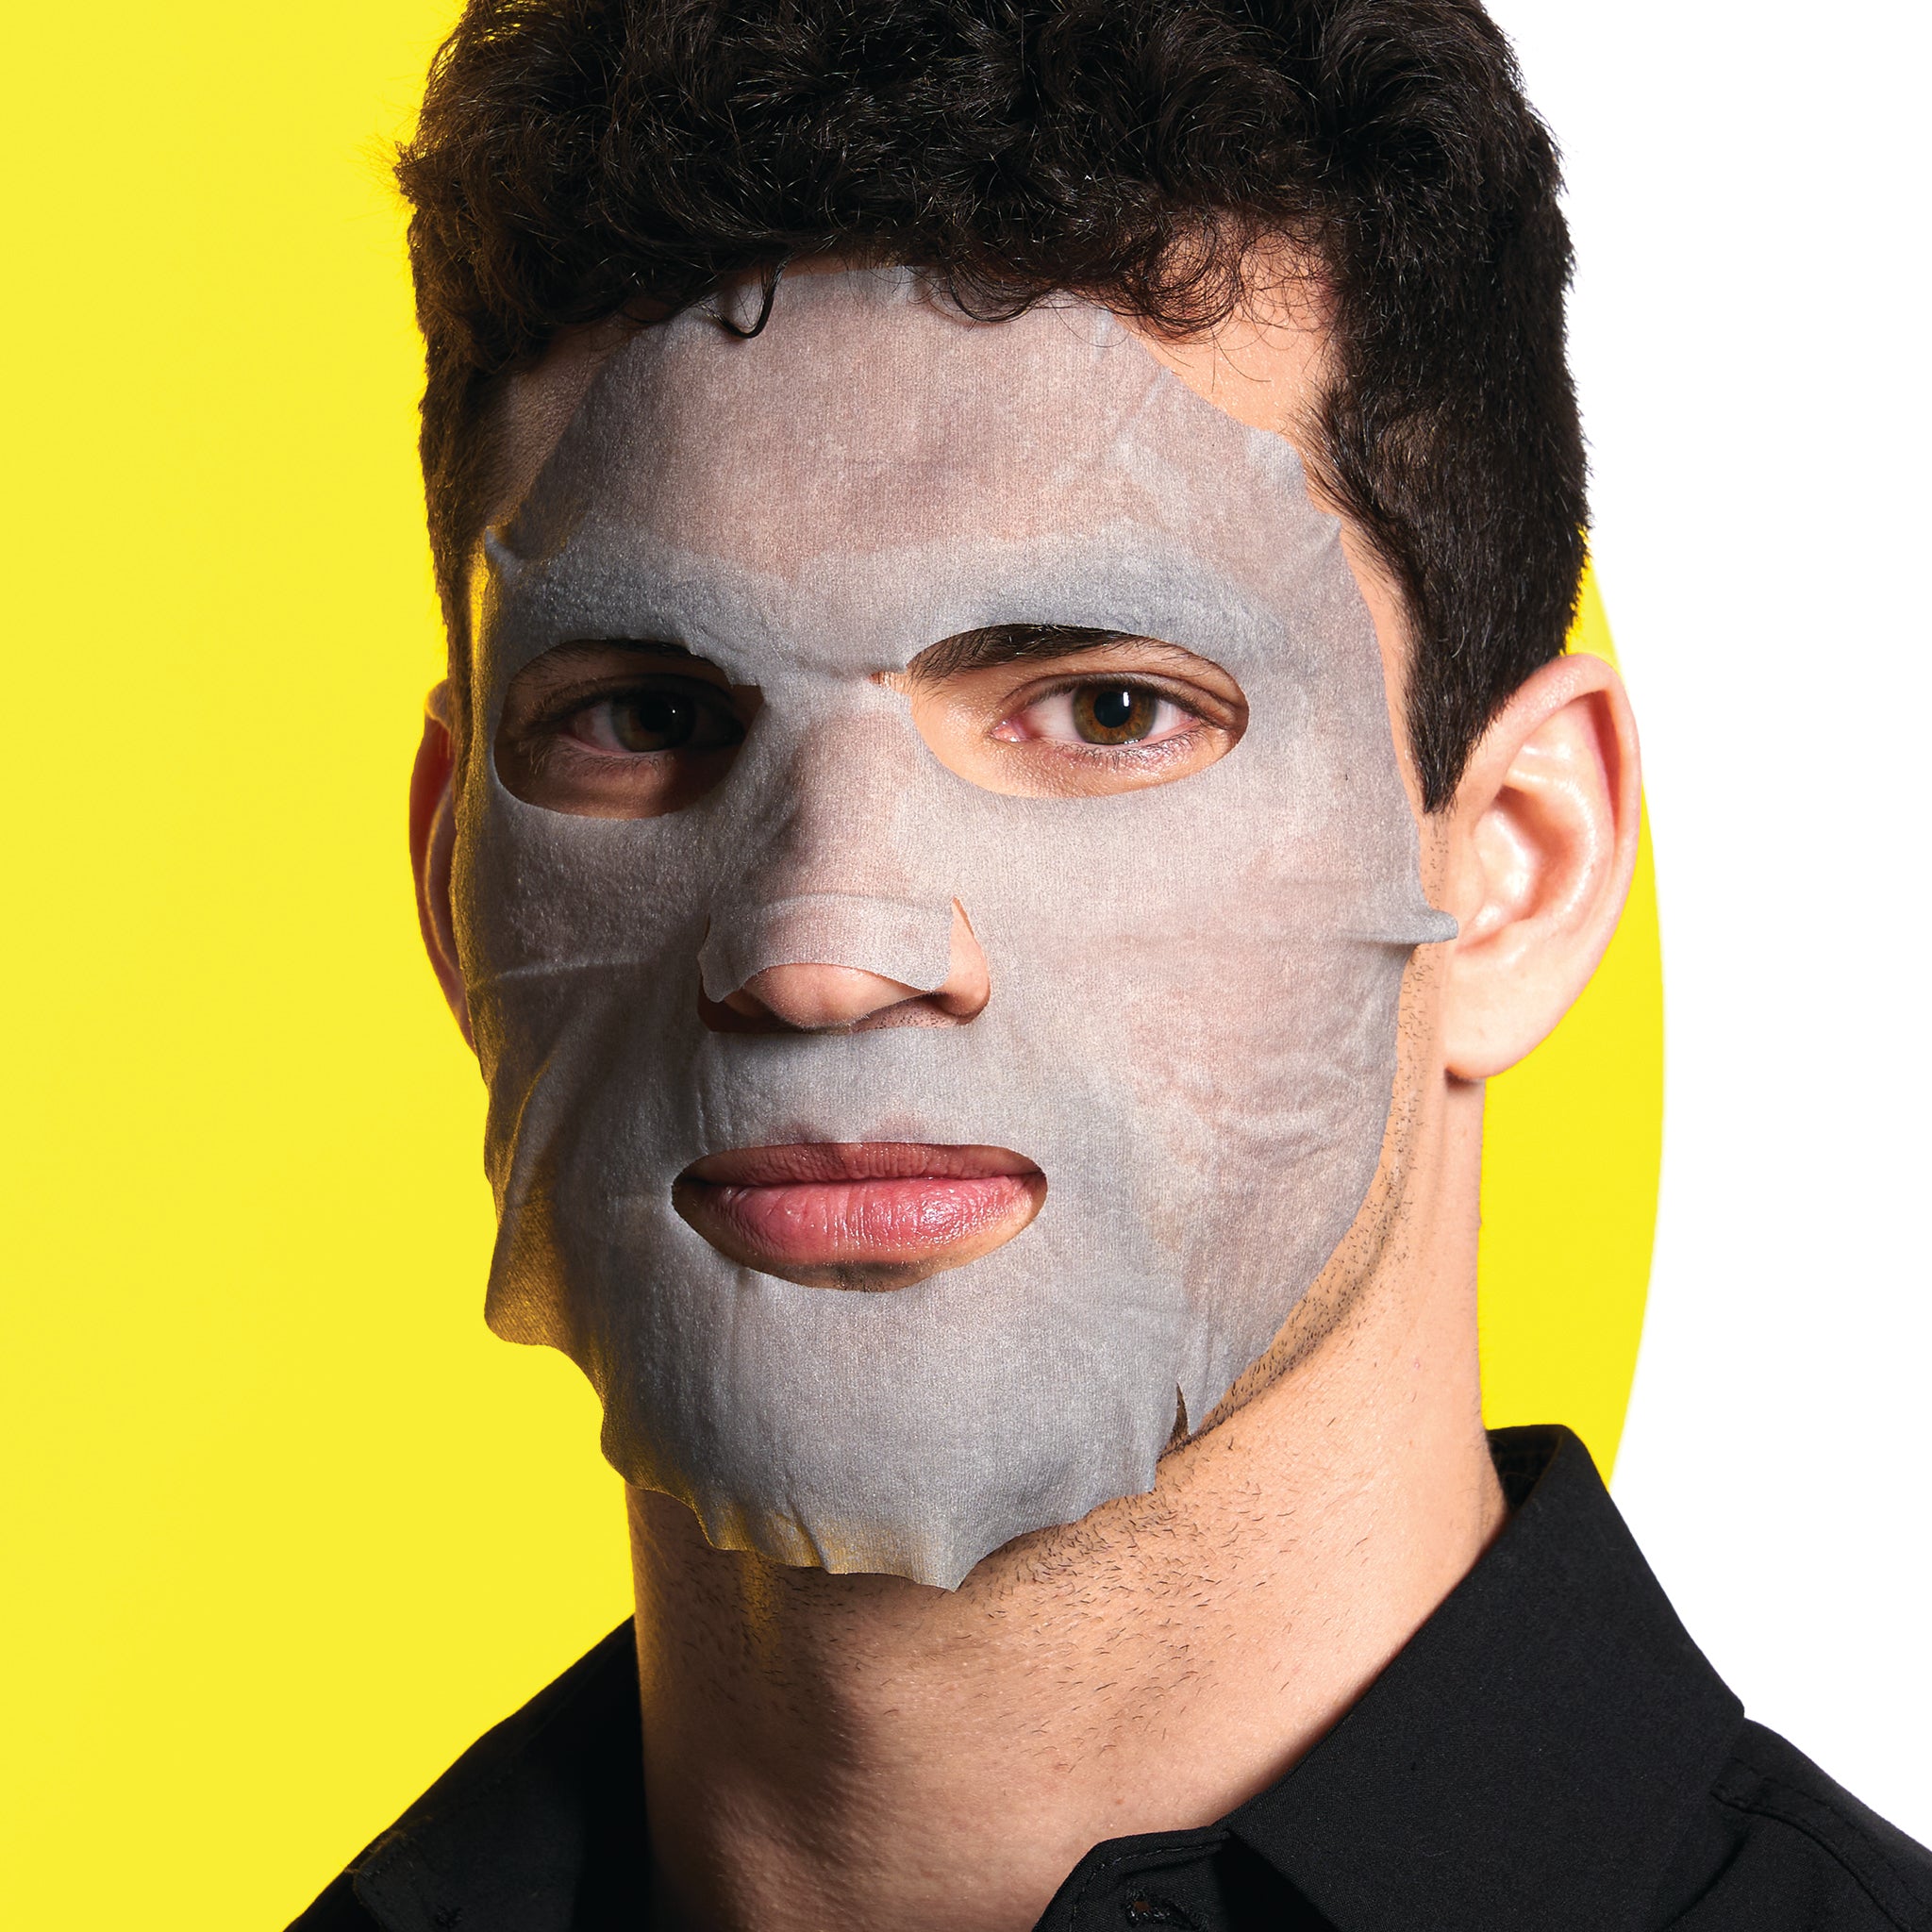 Man using the Weekly Reboot Face Mask